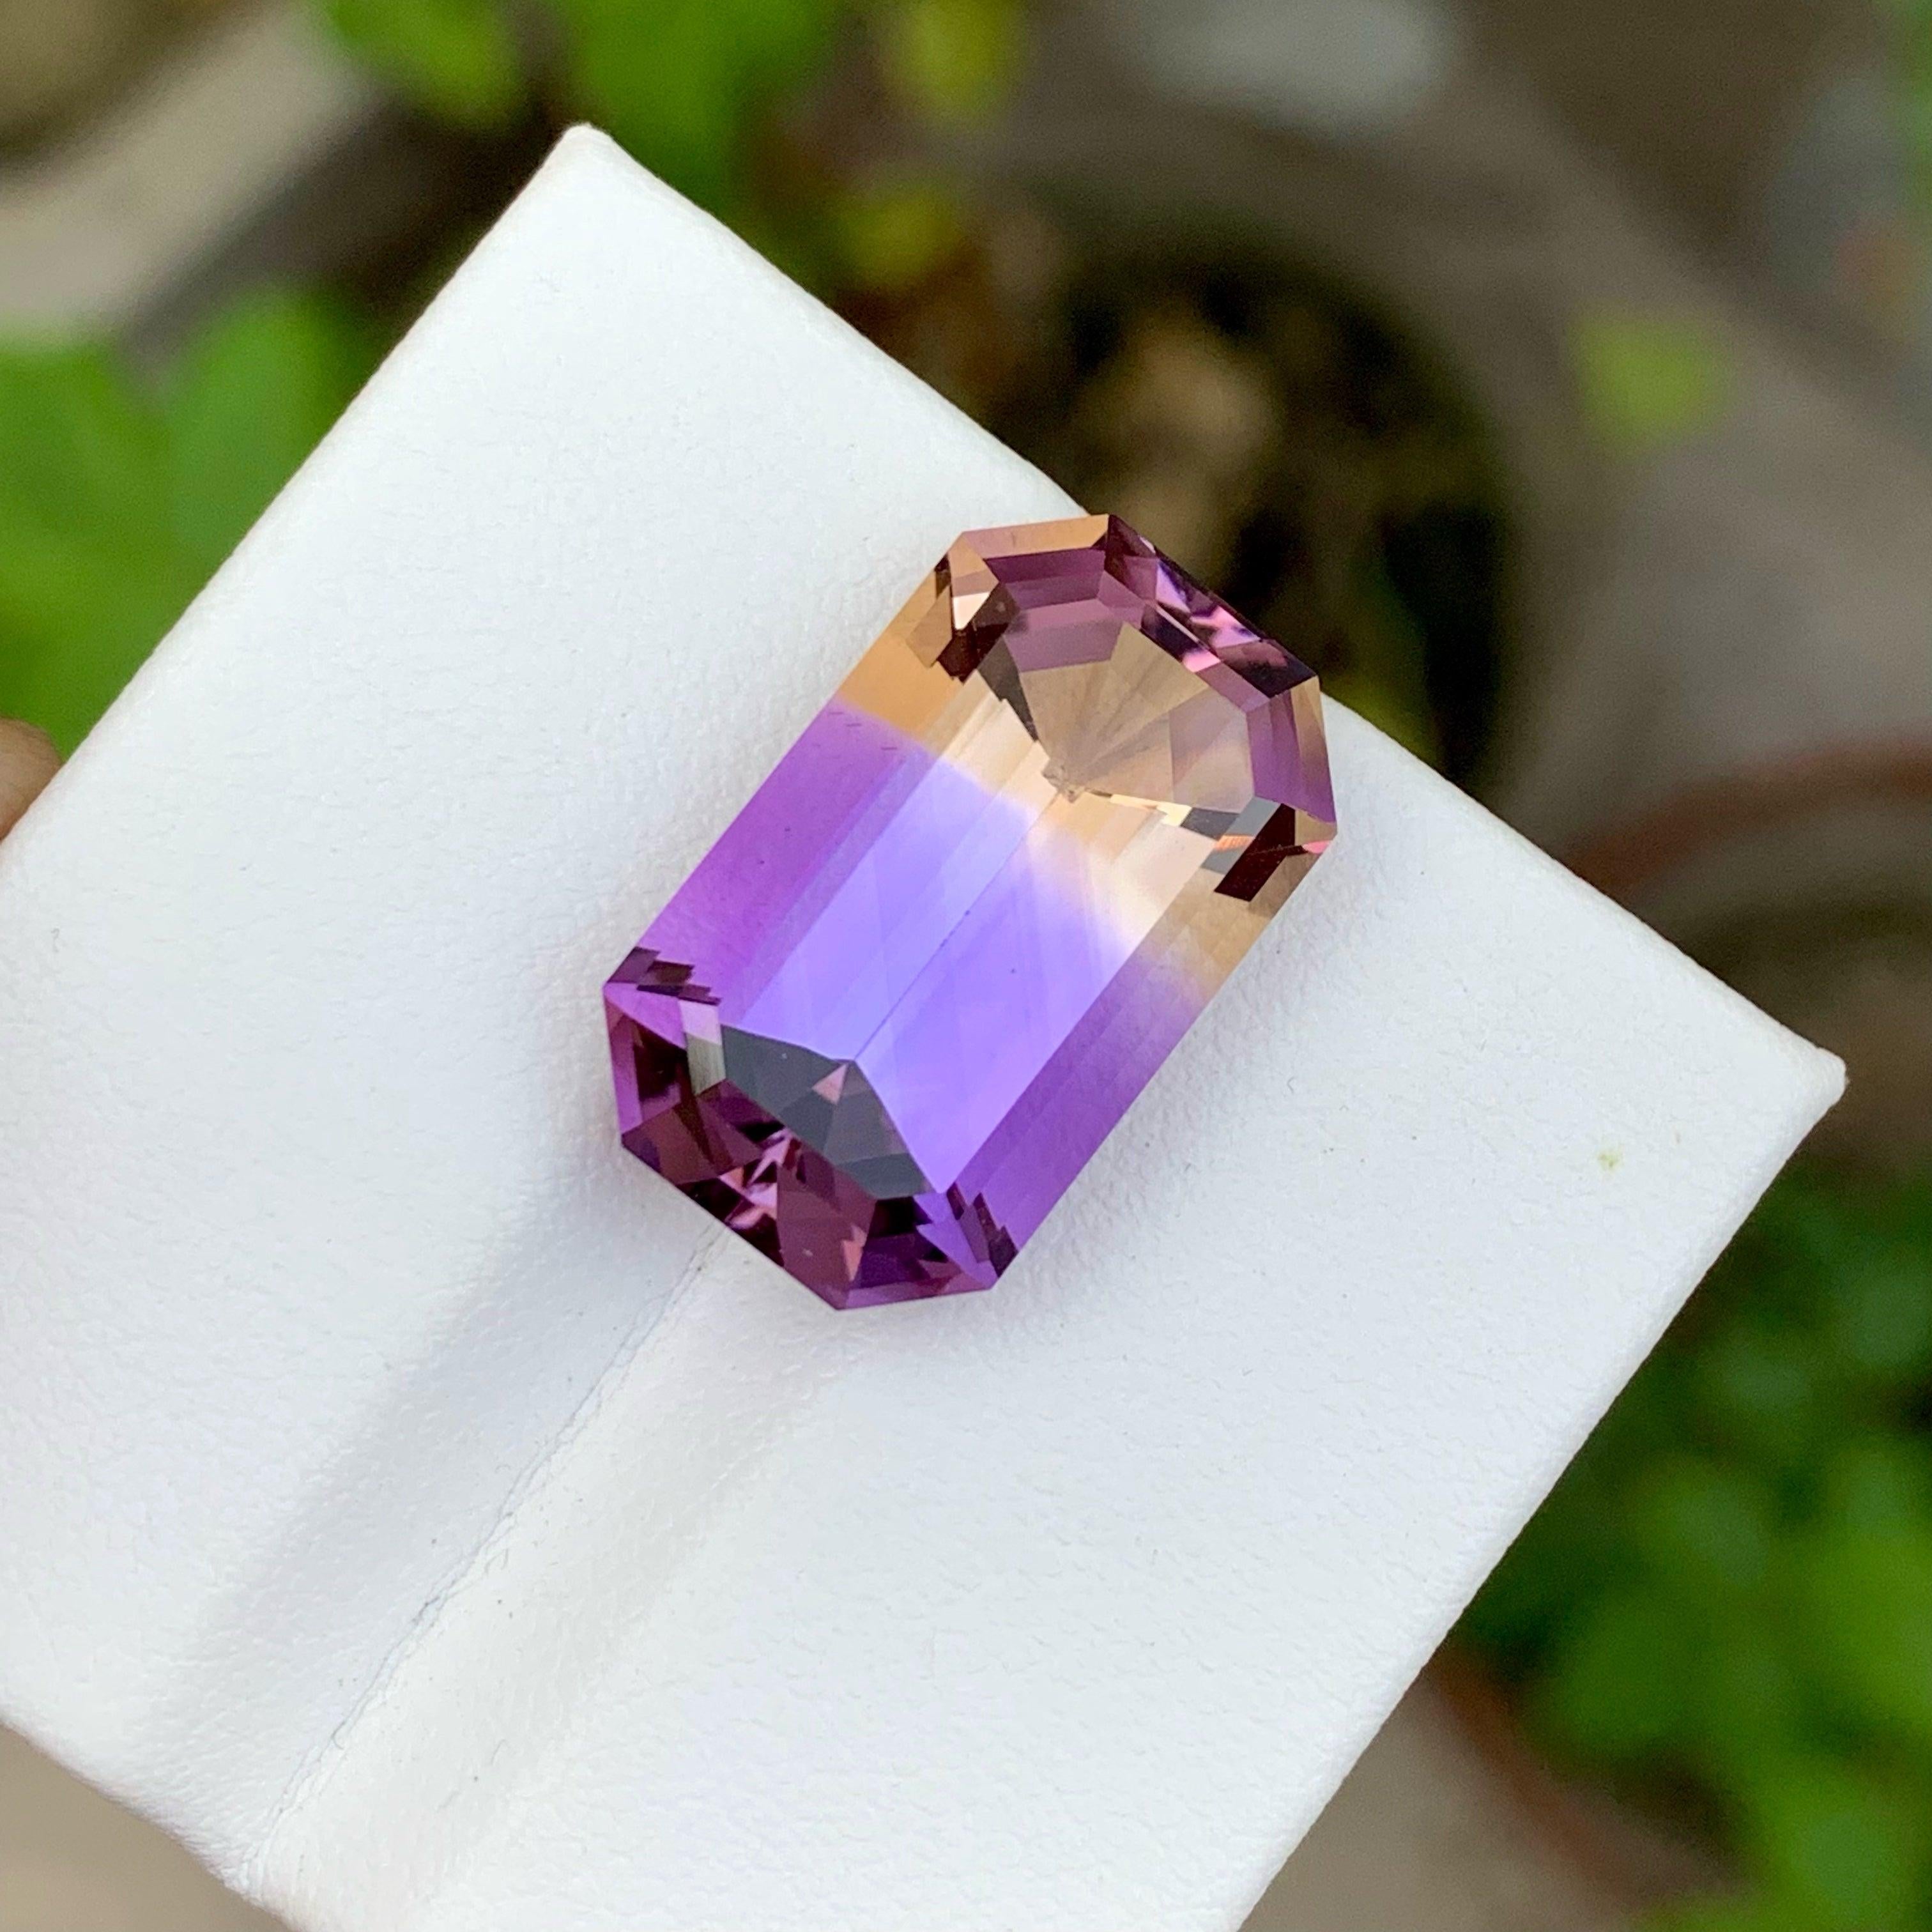 Exquisite Natural Ametrine Gemstone of 16.20 carats from Bolivia has a wonderful cut in a Octagon shape, incredible Purplish Yellow color. Great brilliance. This gem is Loupe Clean Clarity. 

Product Information:
GEMSTONE TYPE:	Exquisite Natural